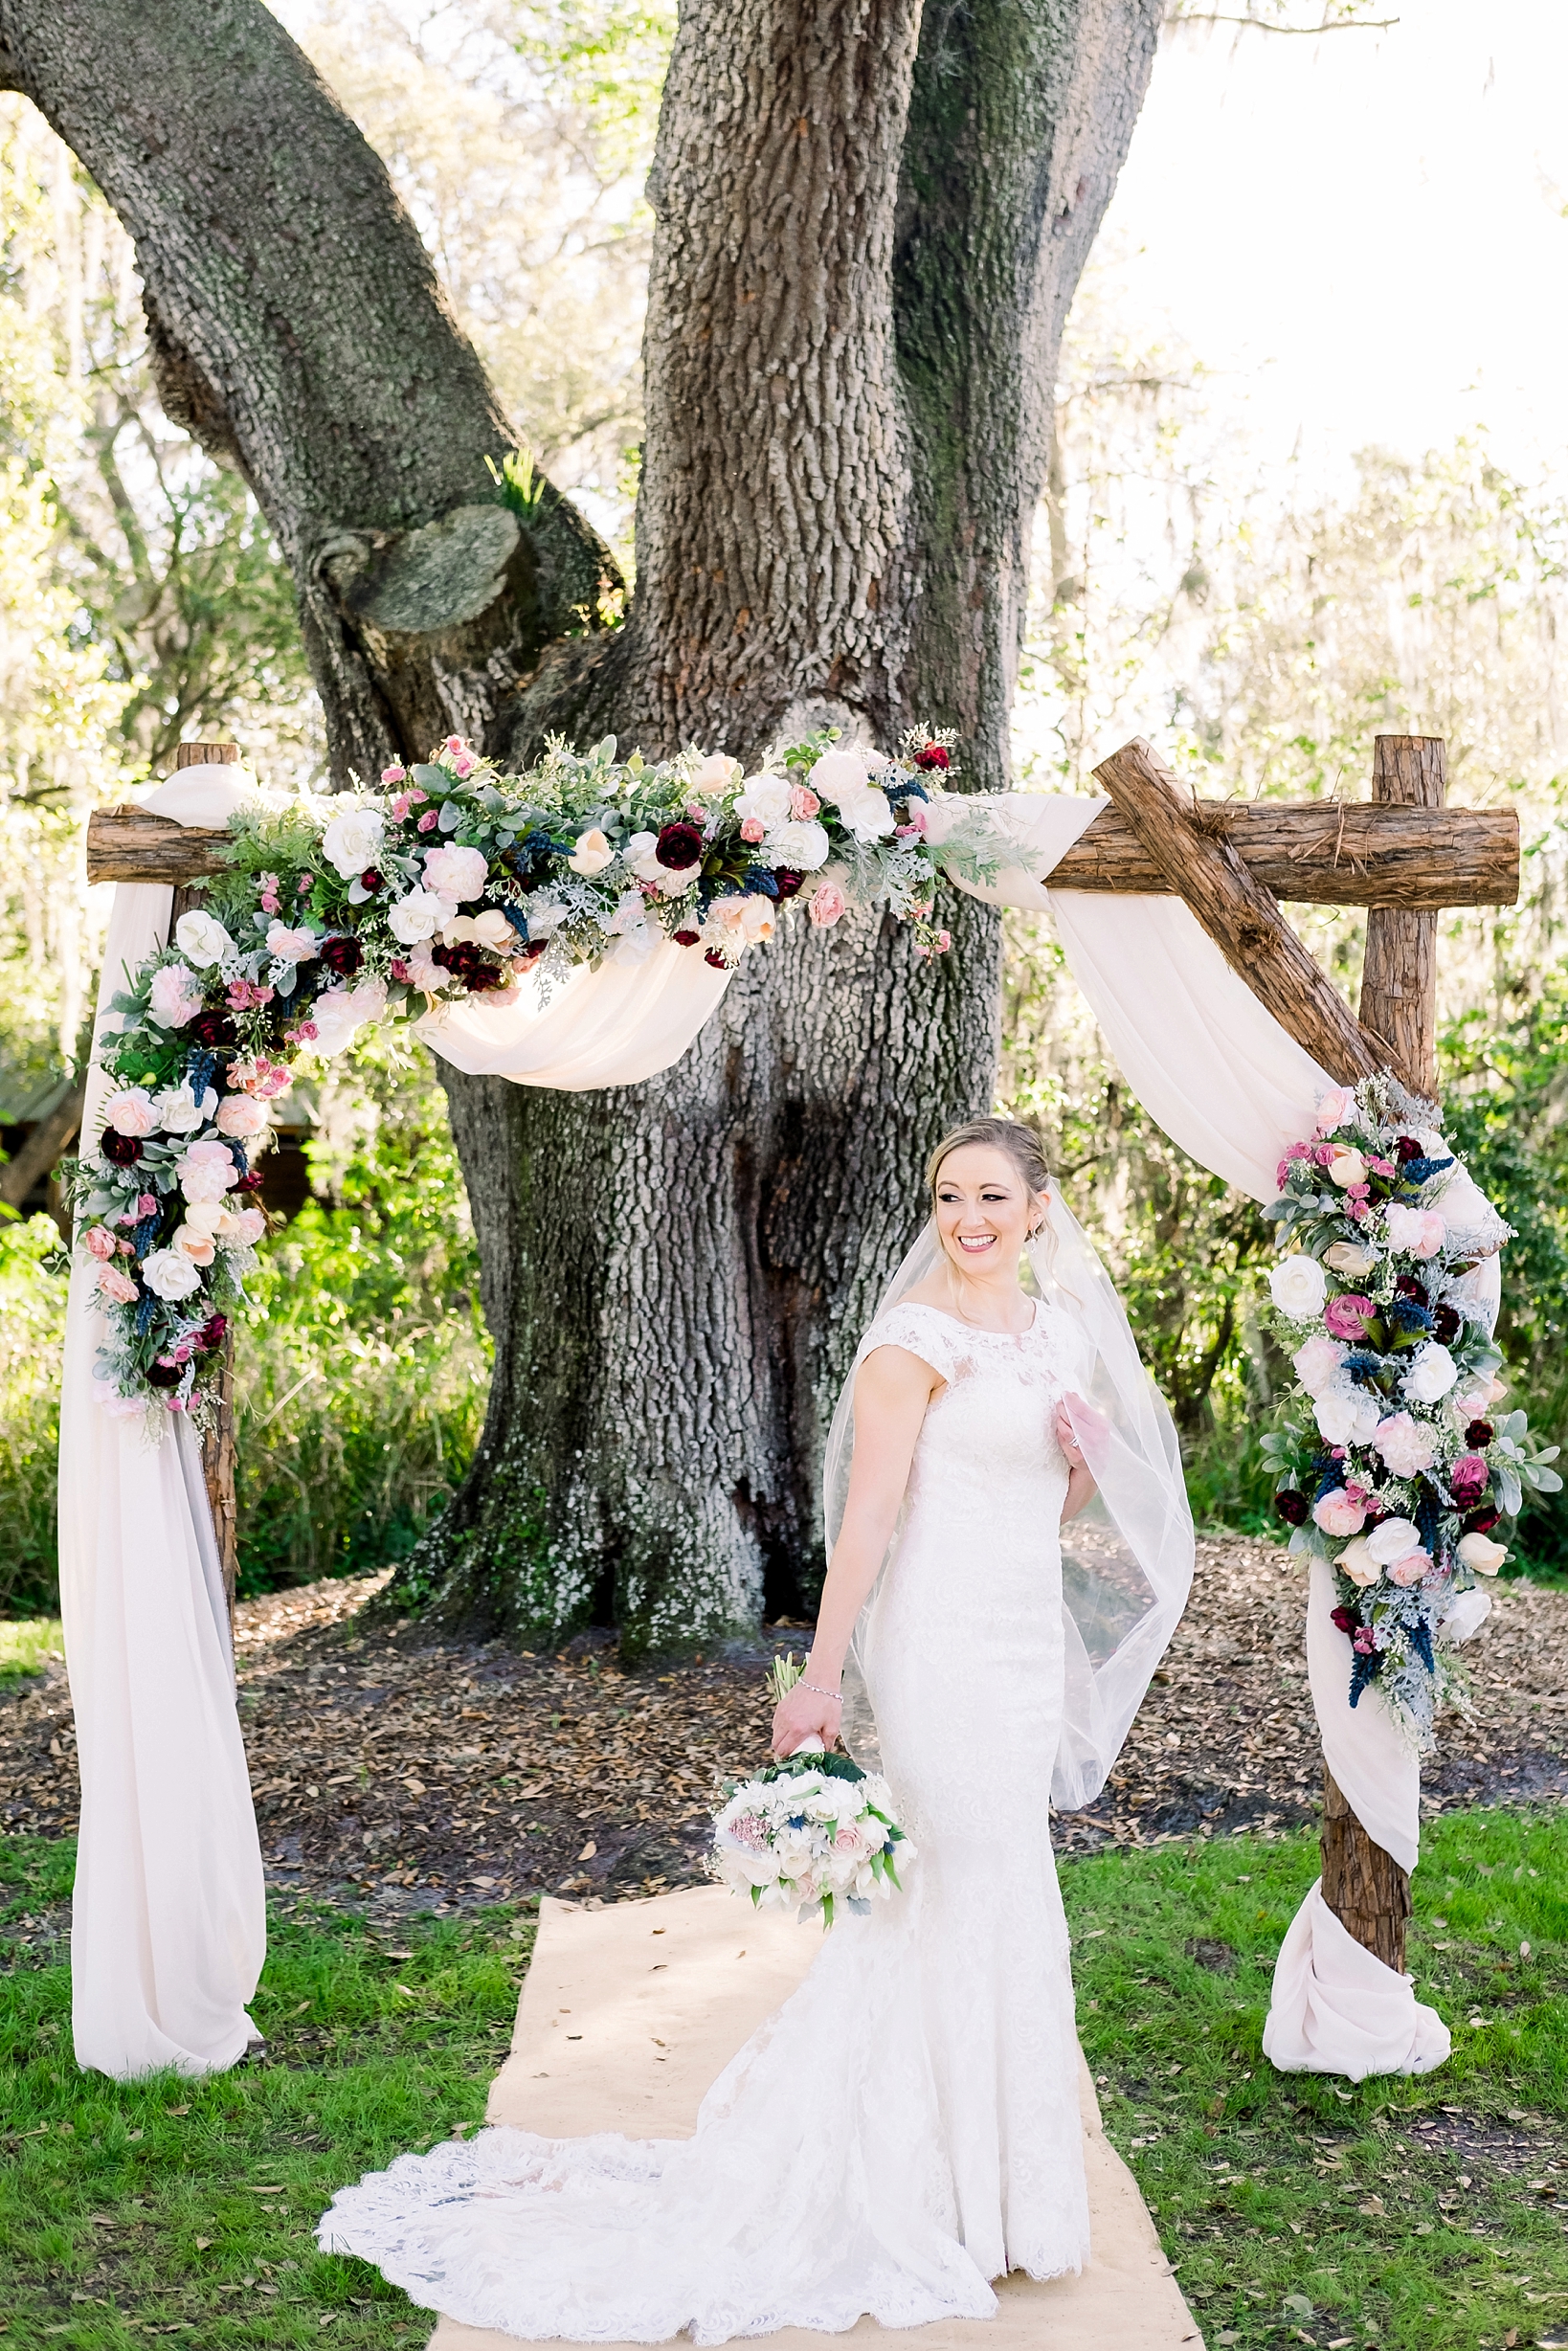 Solo portrait of the Bride holding her wedding bouquet under an oak tree and her wedding arch